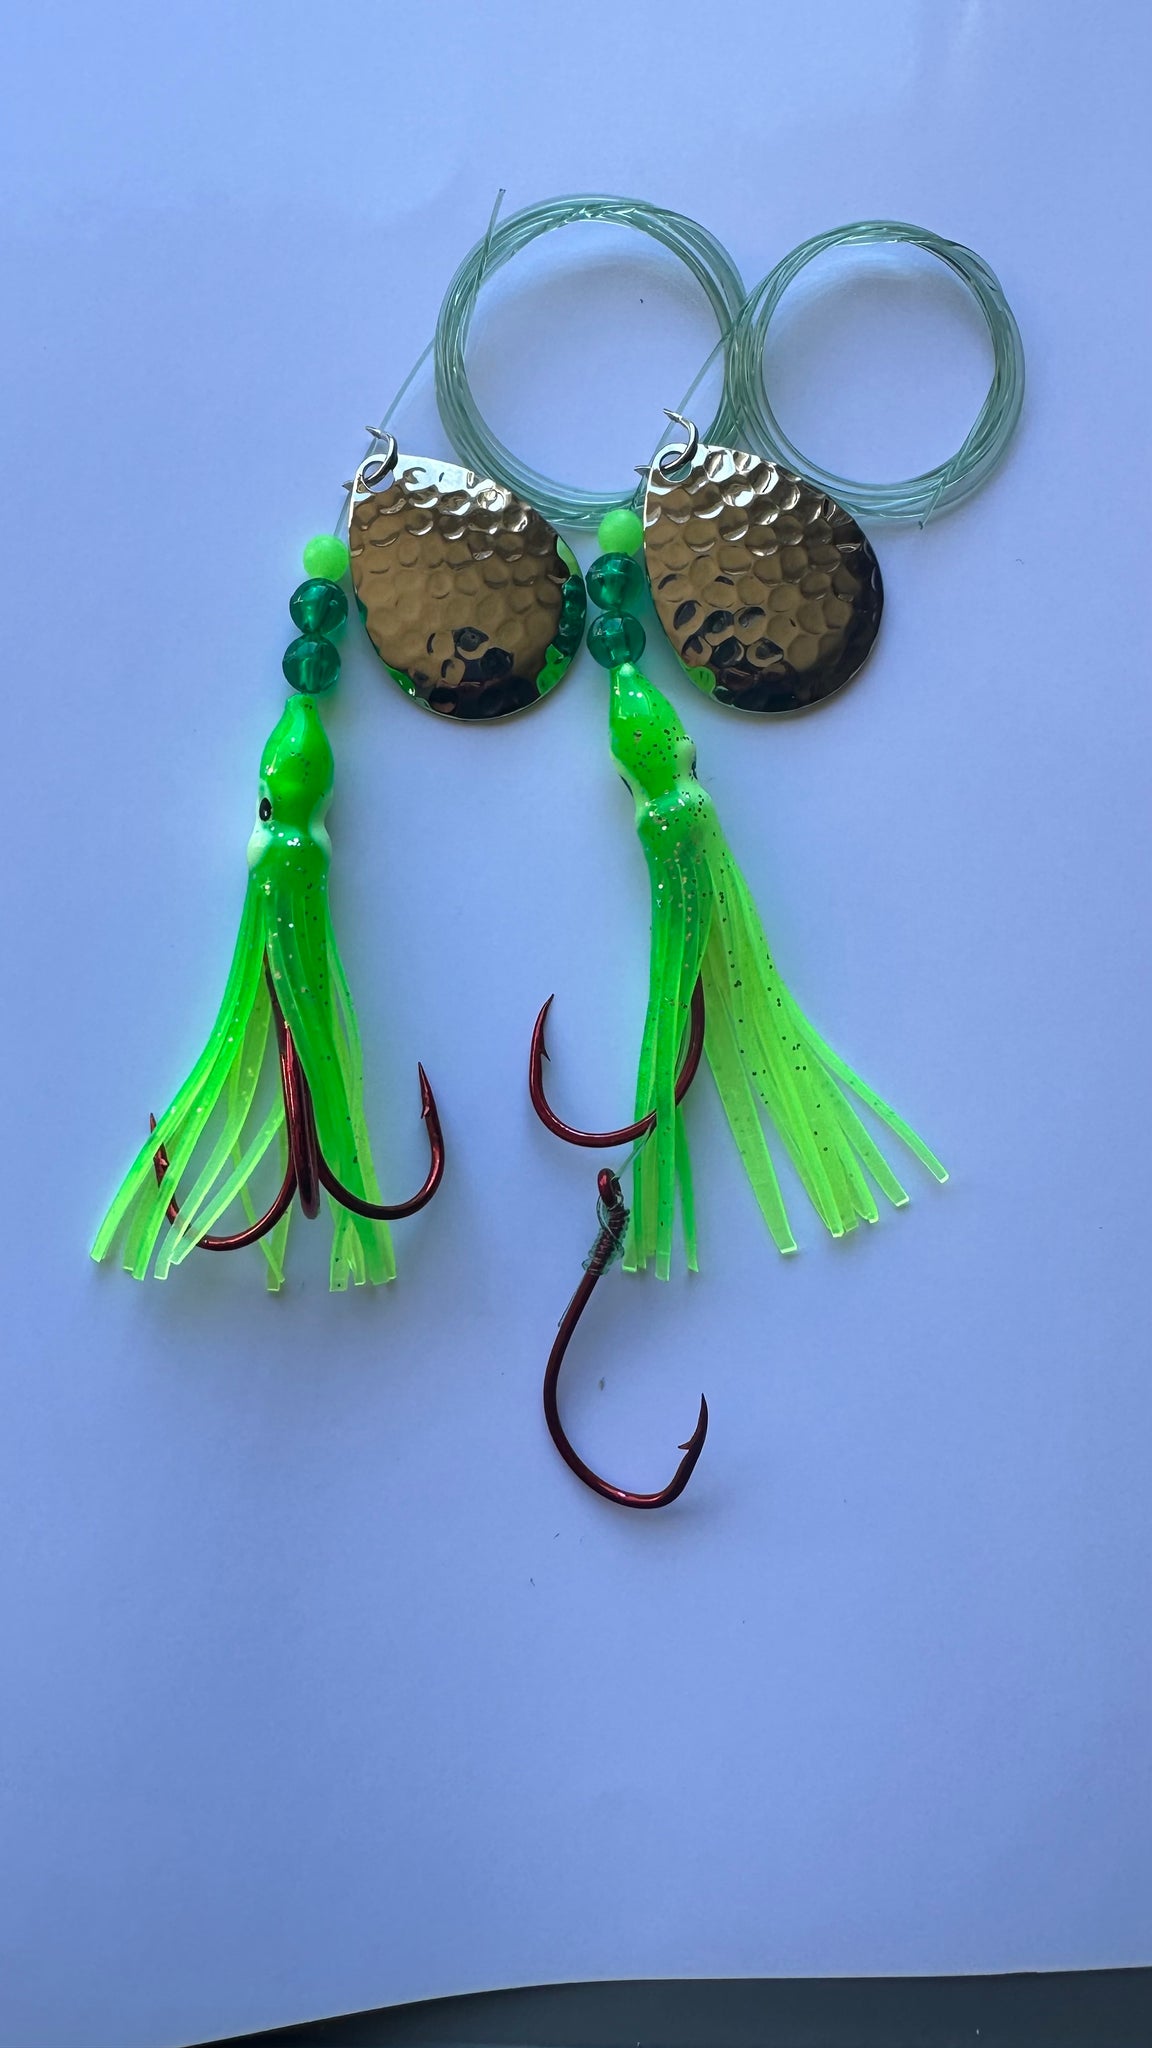 Salmon Tackle- Twin Pack Green Chartreuse #10 Luminous Salmon Hoochie's 1) Tied on a 2/0 Red Treble and the other on a 4/0 Red Octopus Snell Rig on 40 Lb Test Trilene and a Hammered Nickel Colorado Spinner Blade